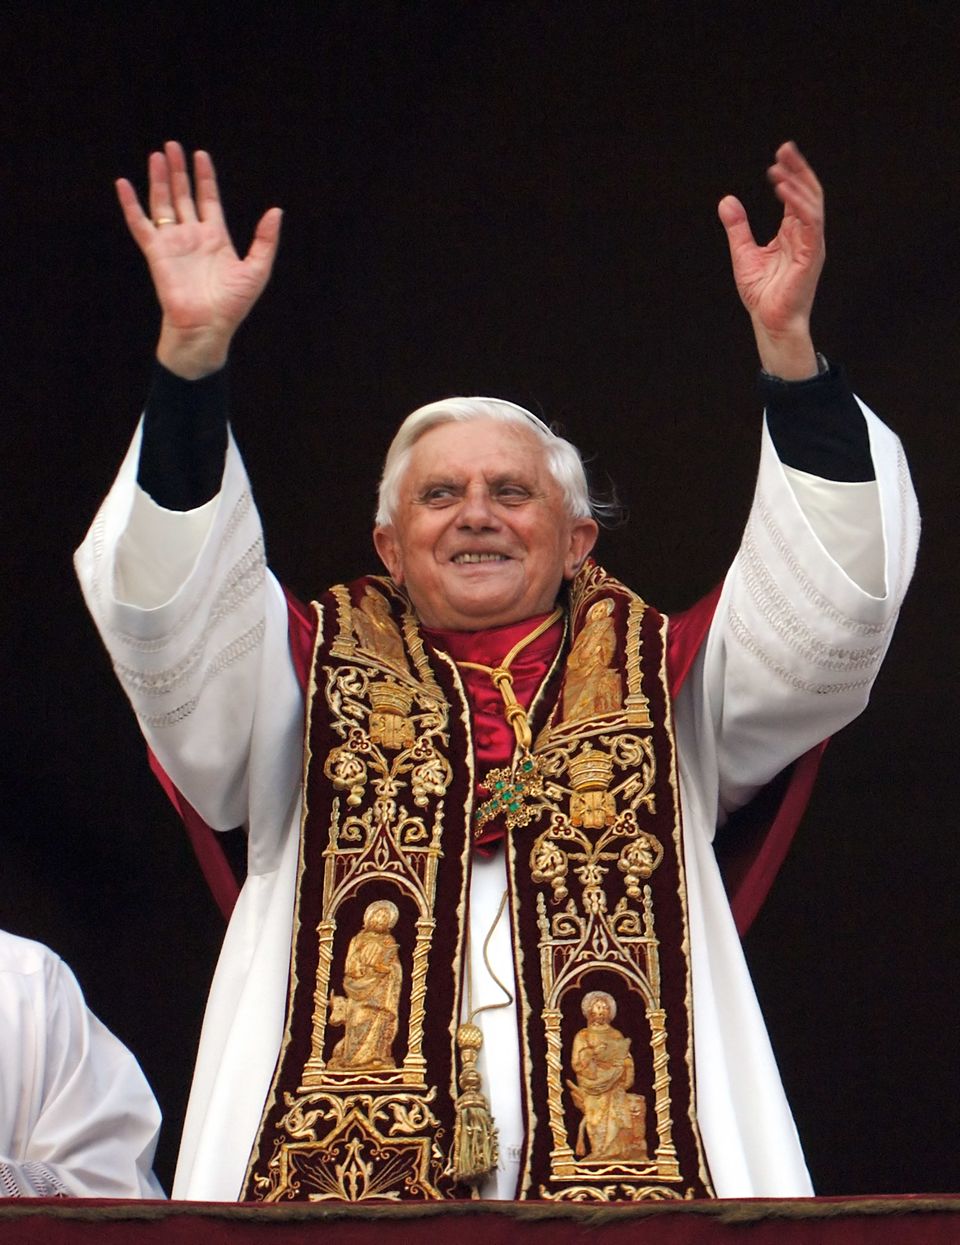 April 19, 2005 -- Elected Pope